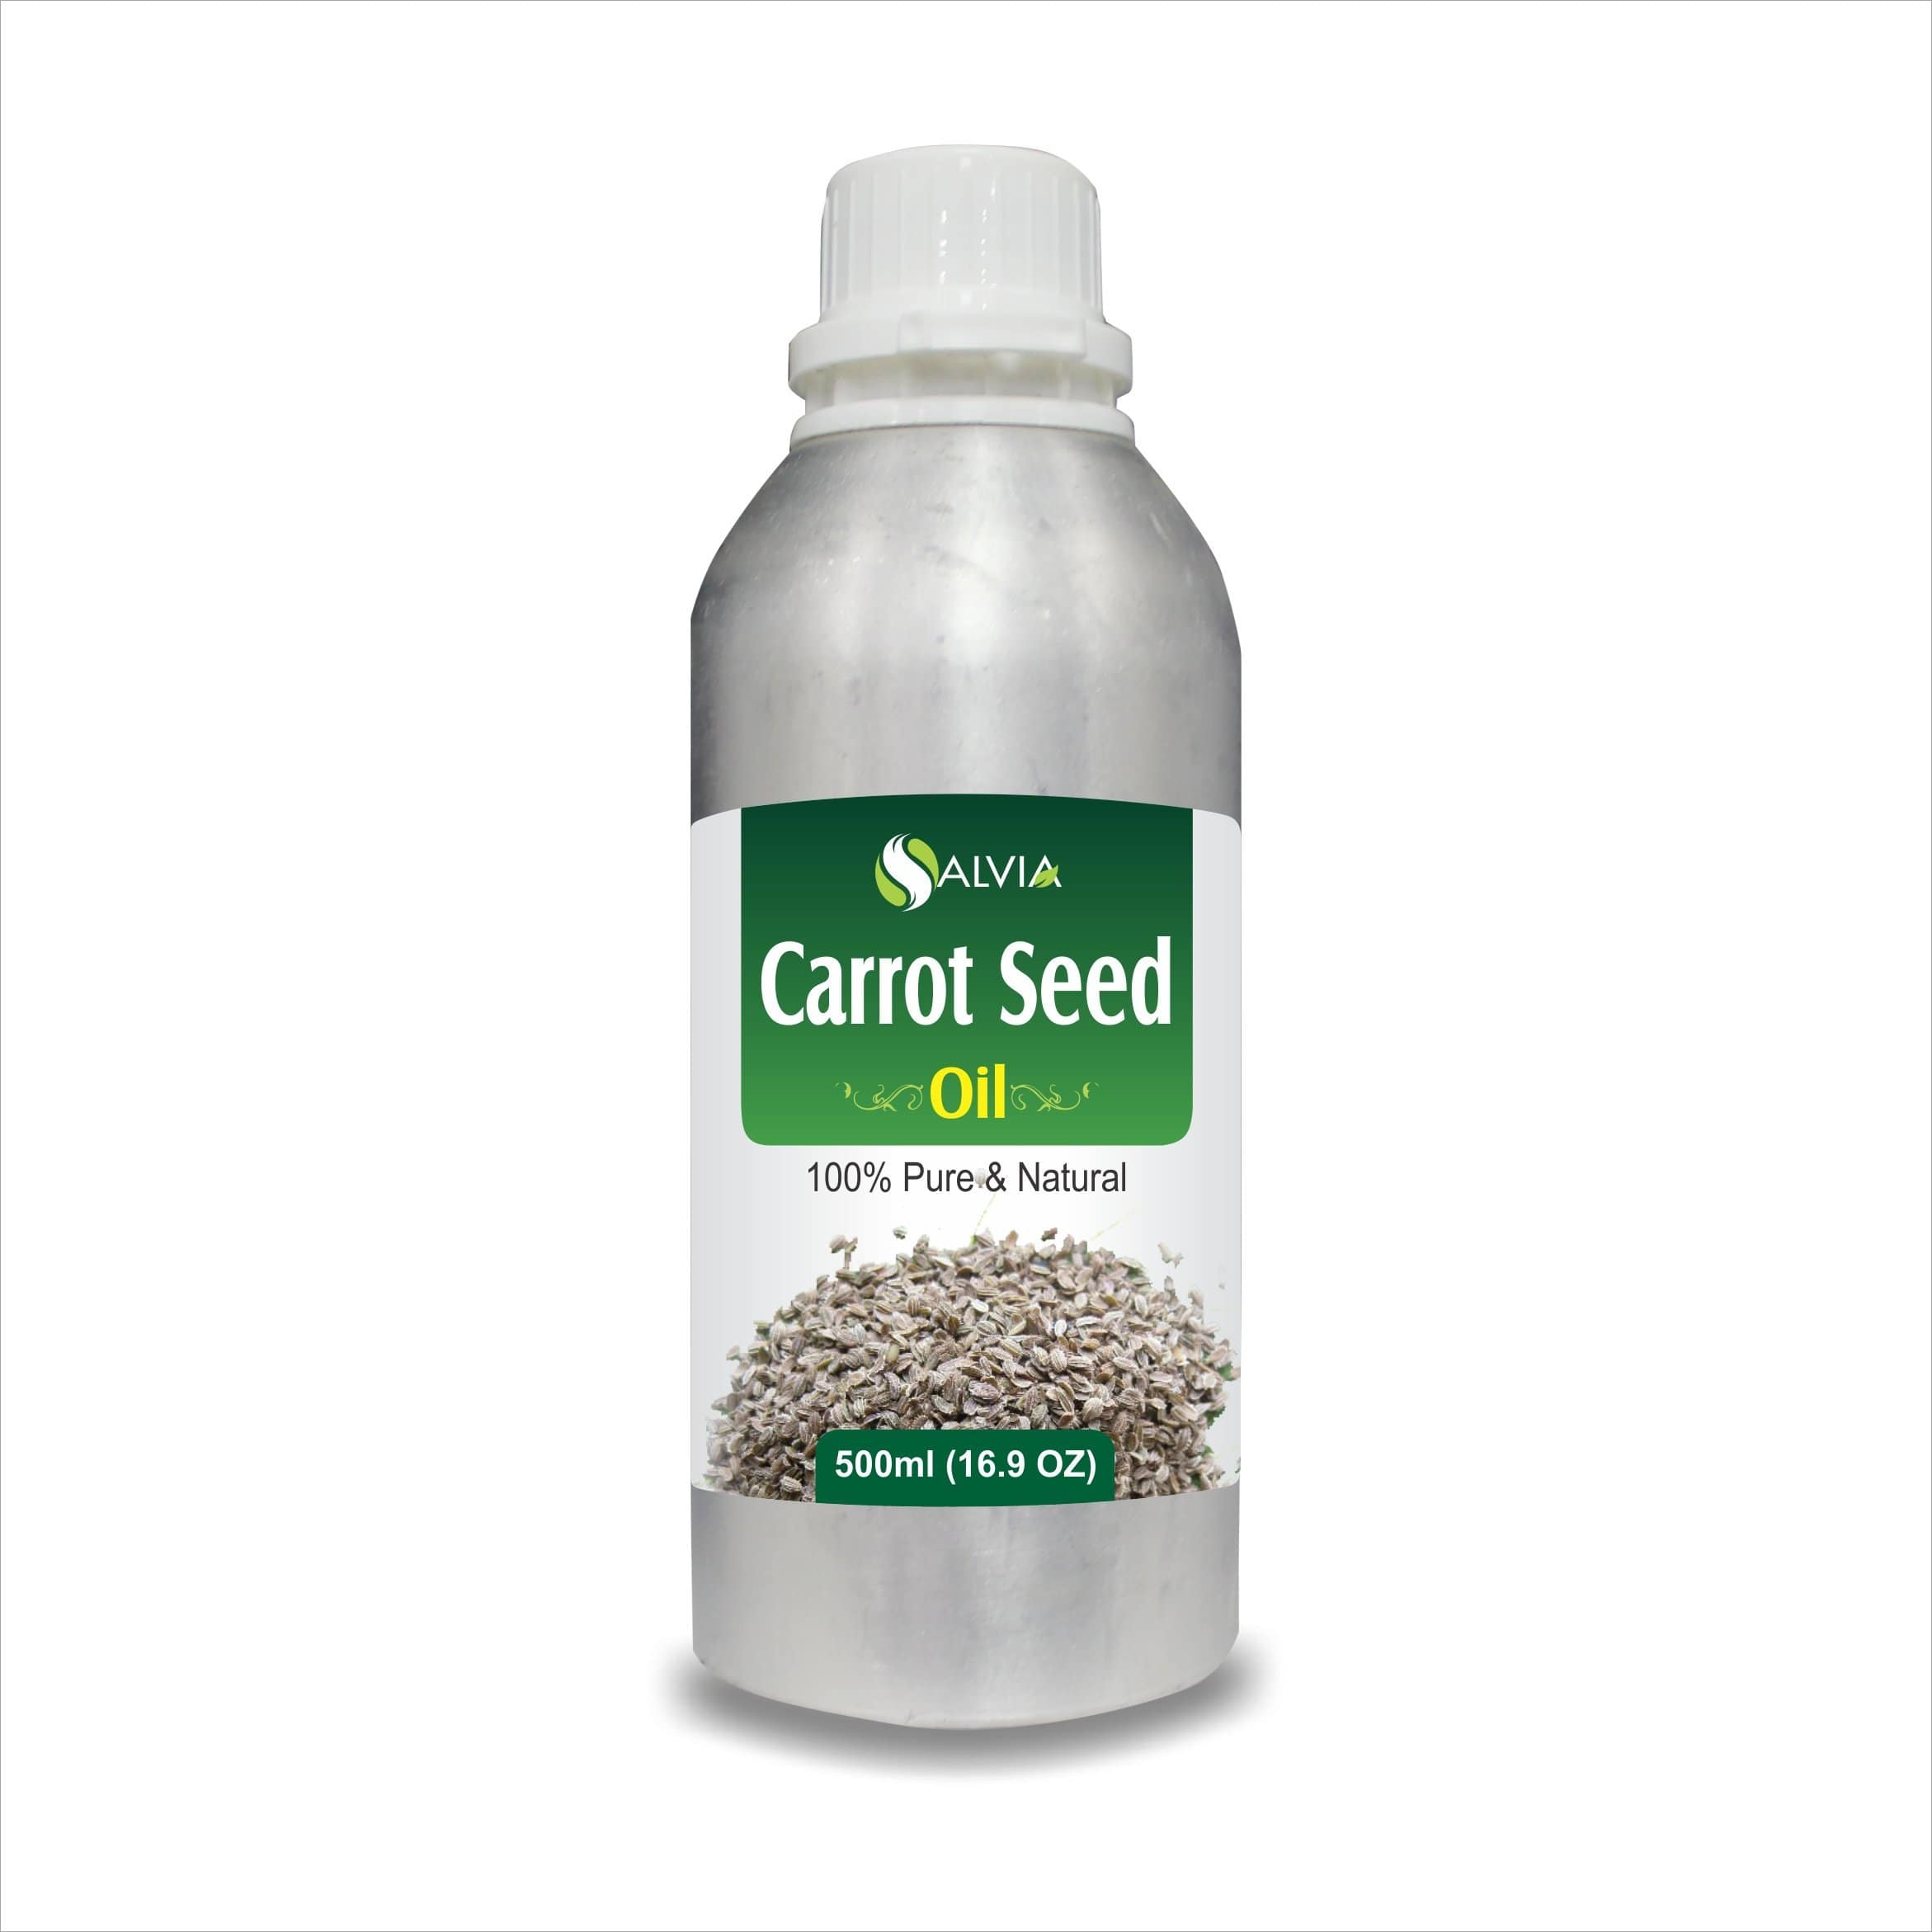 Carrot Seed Oil price